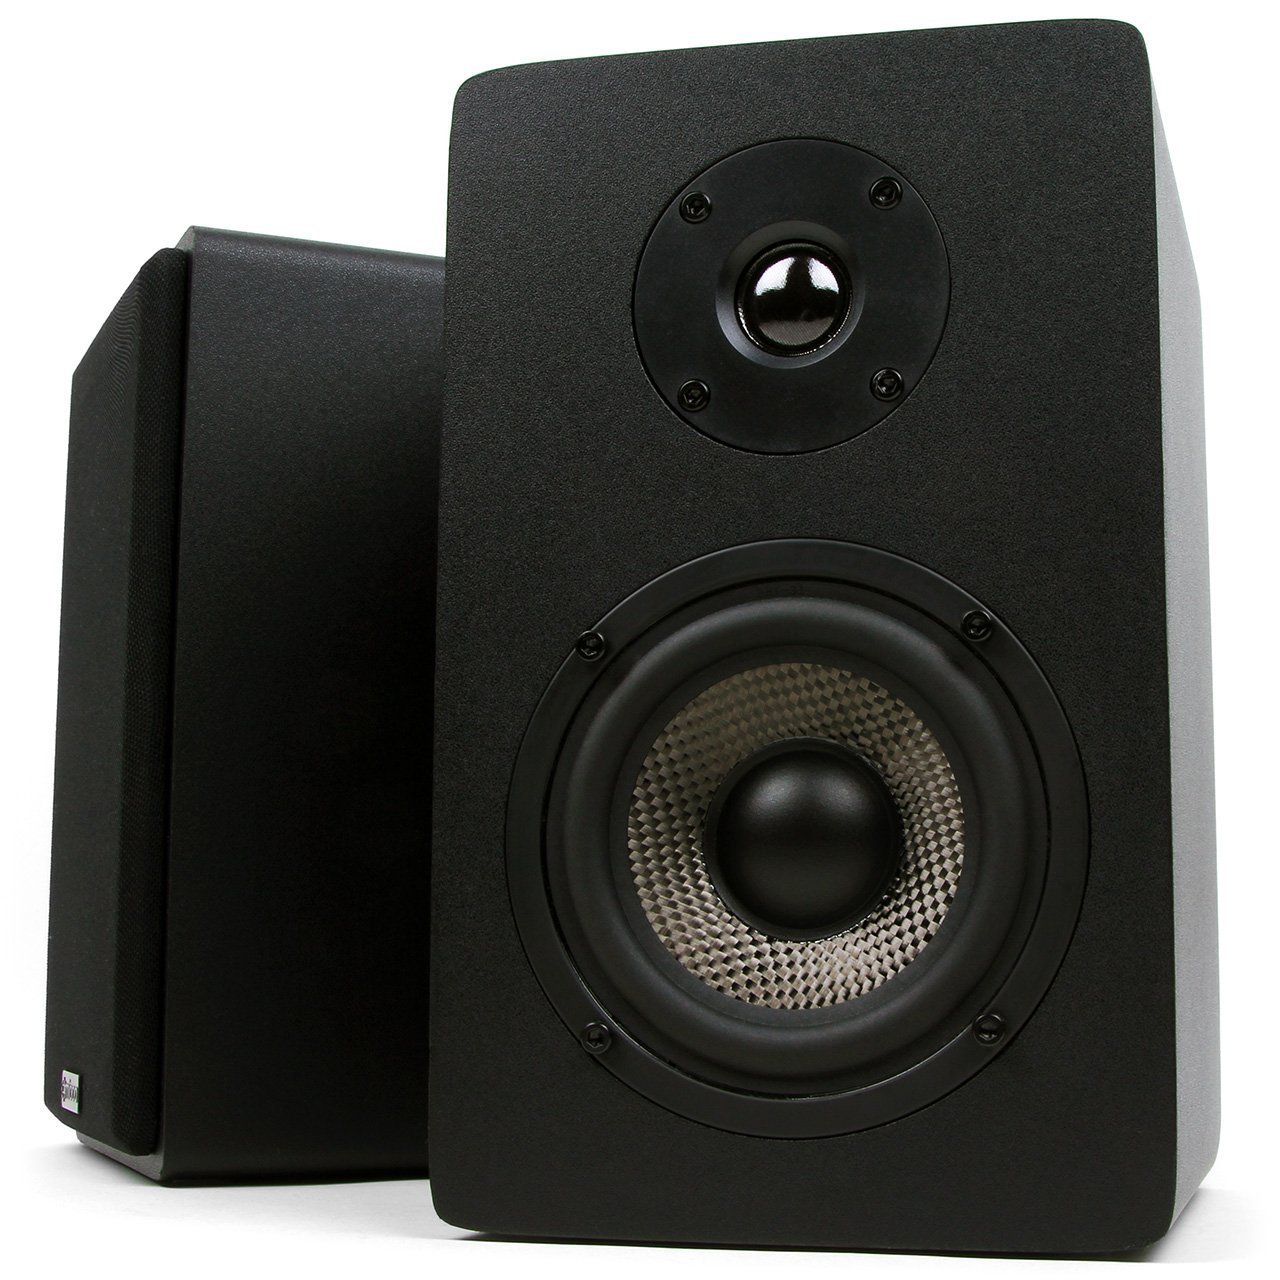 Micca MB42X Bookshelf Speakers With 4-Inch Carbon Fiber Woofer and Silk Dome Tweeter (Black, Pair)